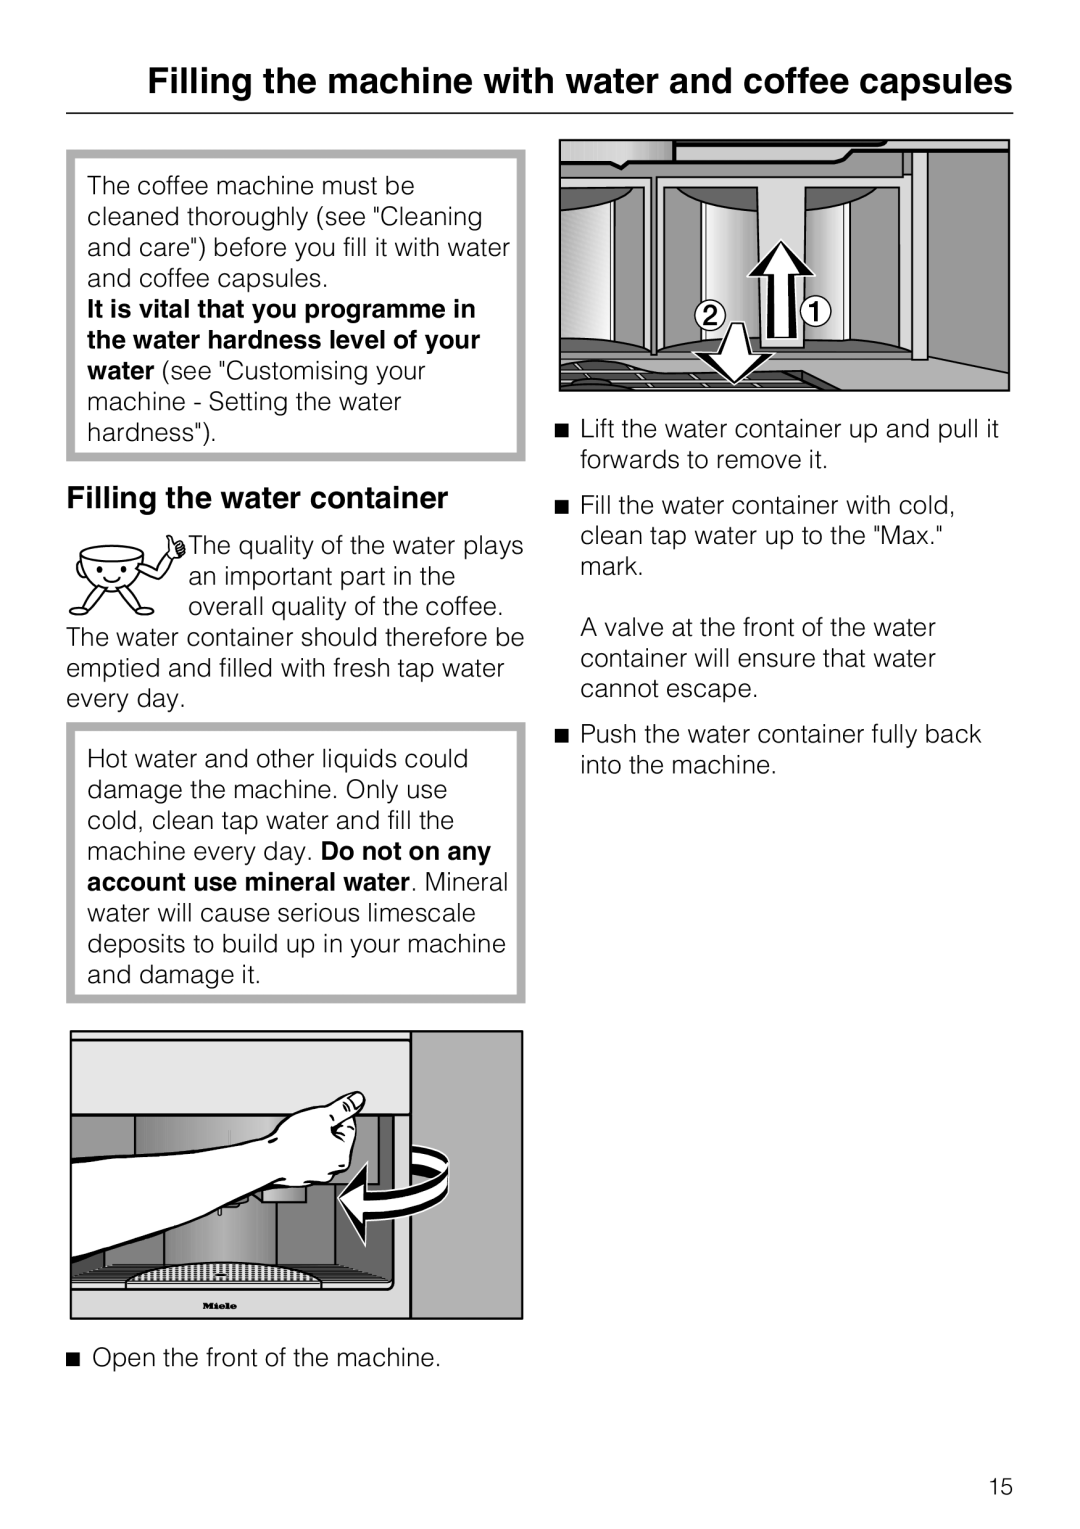 Miele CVA 3650 installation instructions Filling the water container, Open the front of the machine 